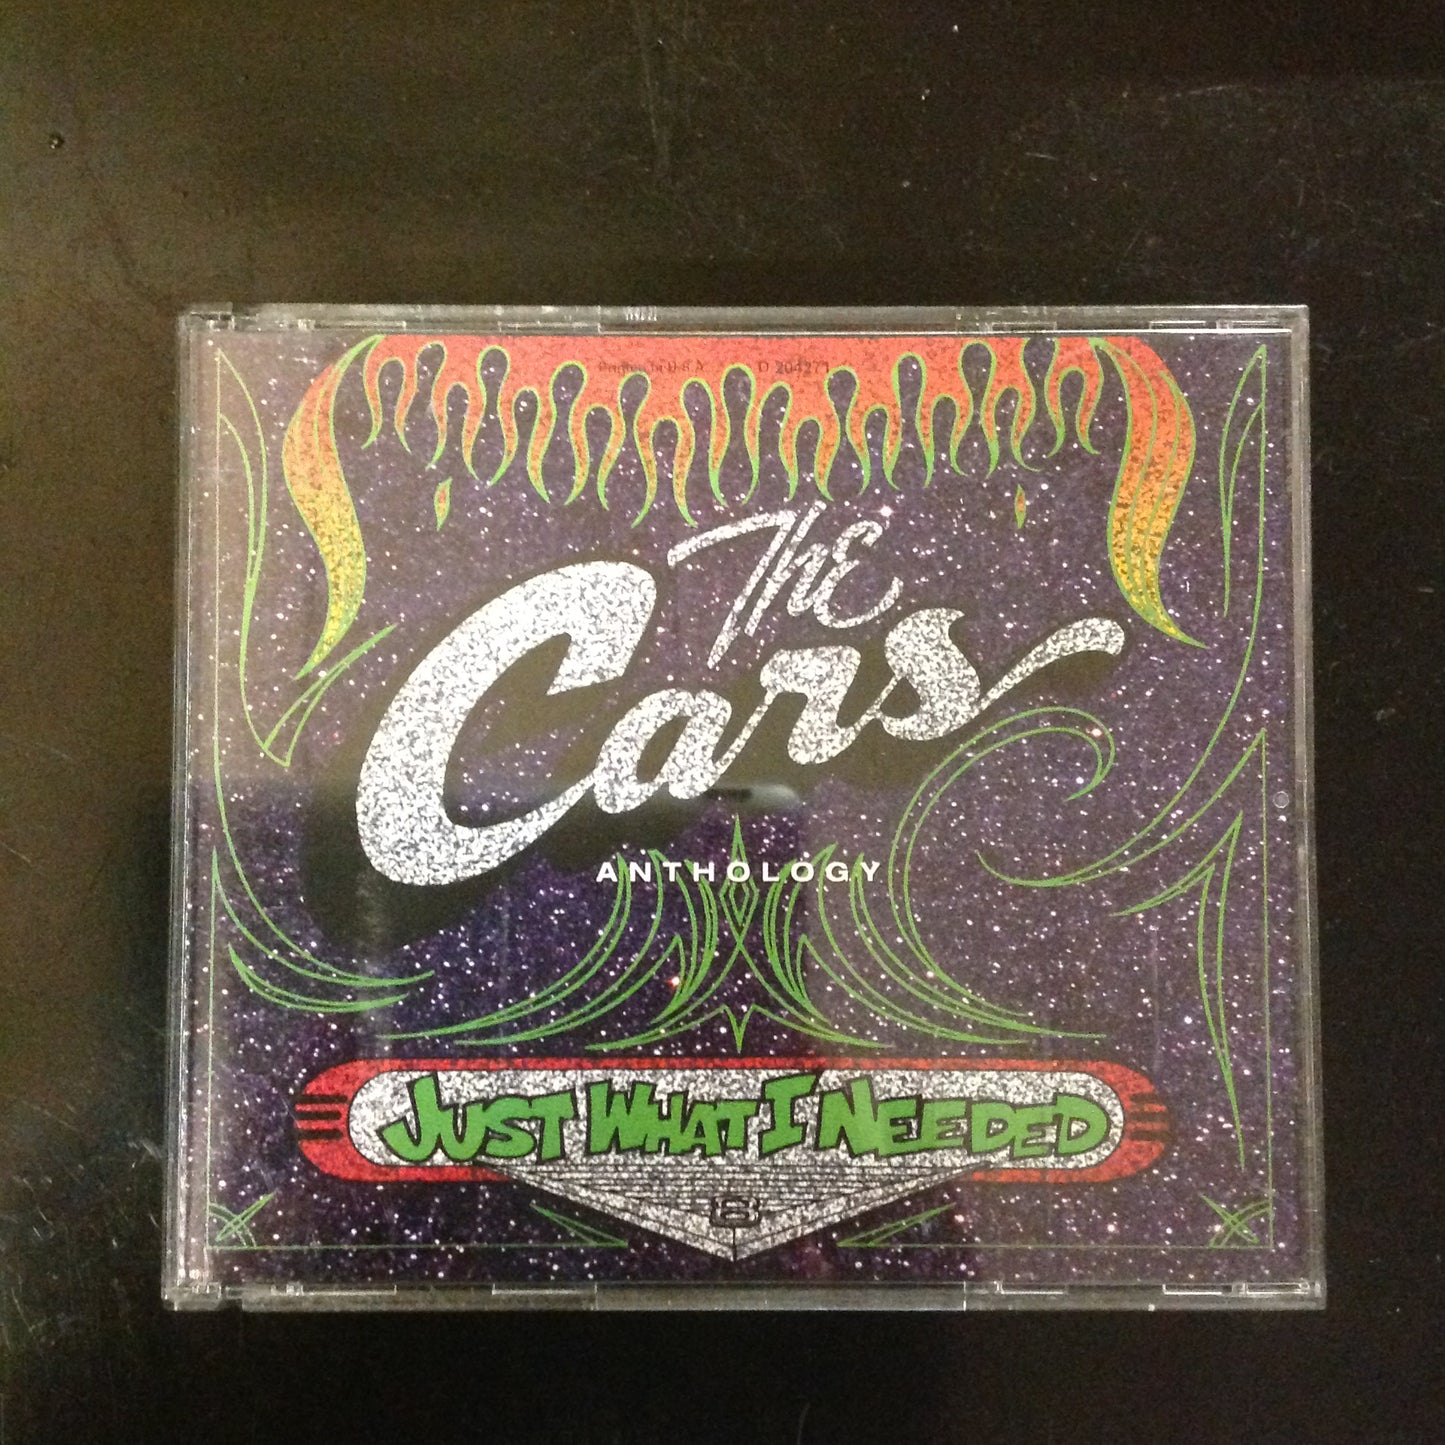 CD 2 Disc The Cars Anthology Just What I Needed R2 73506 1995